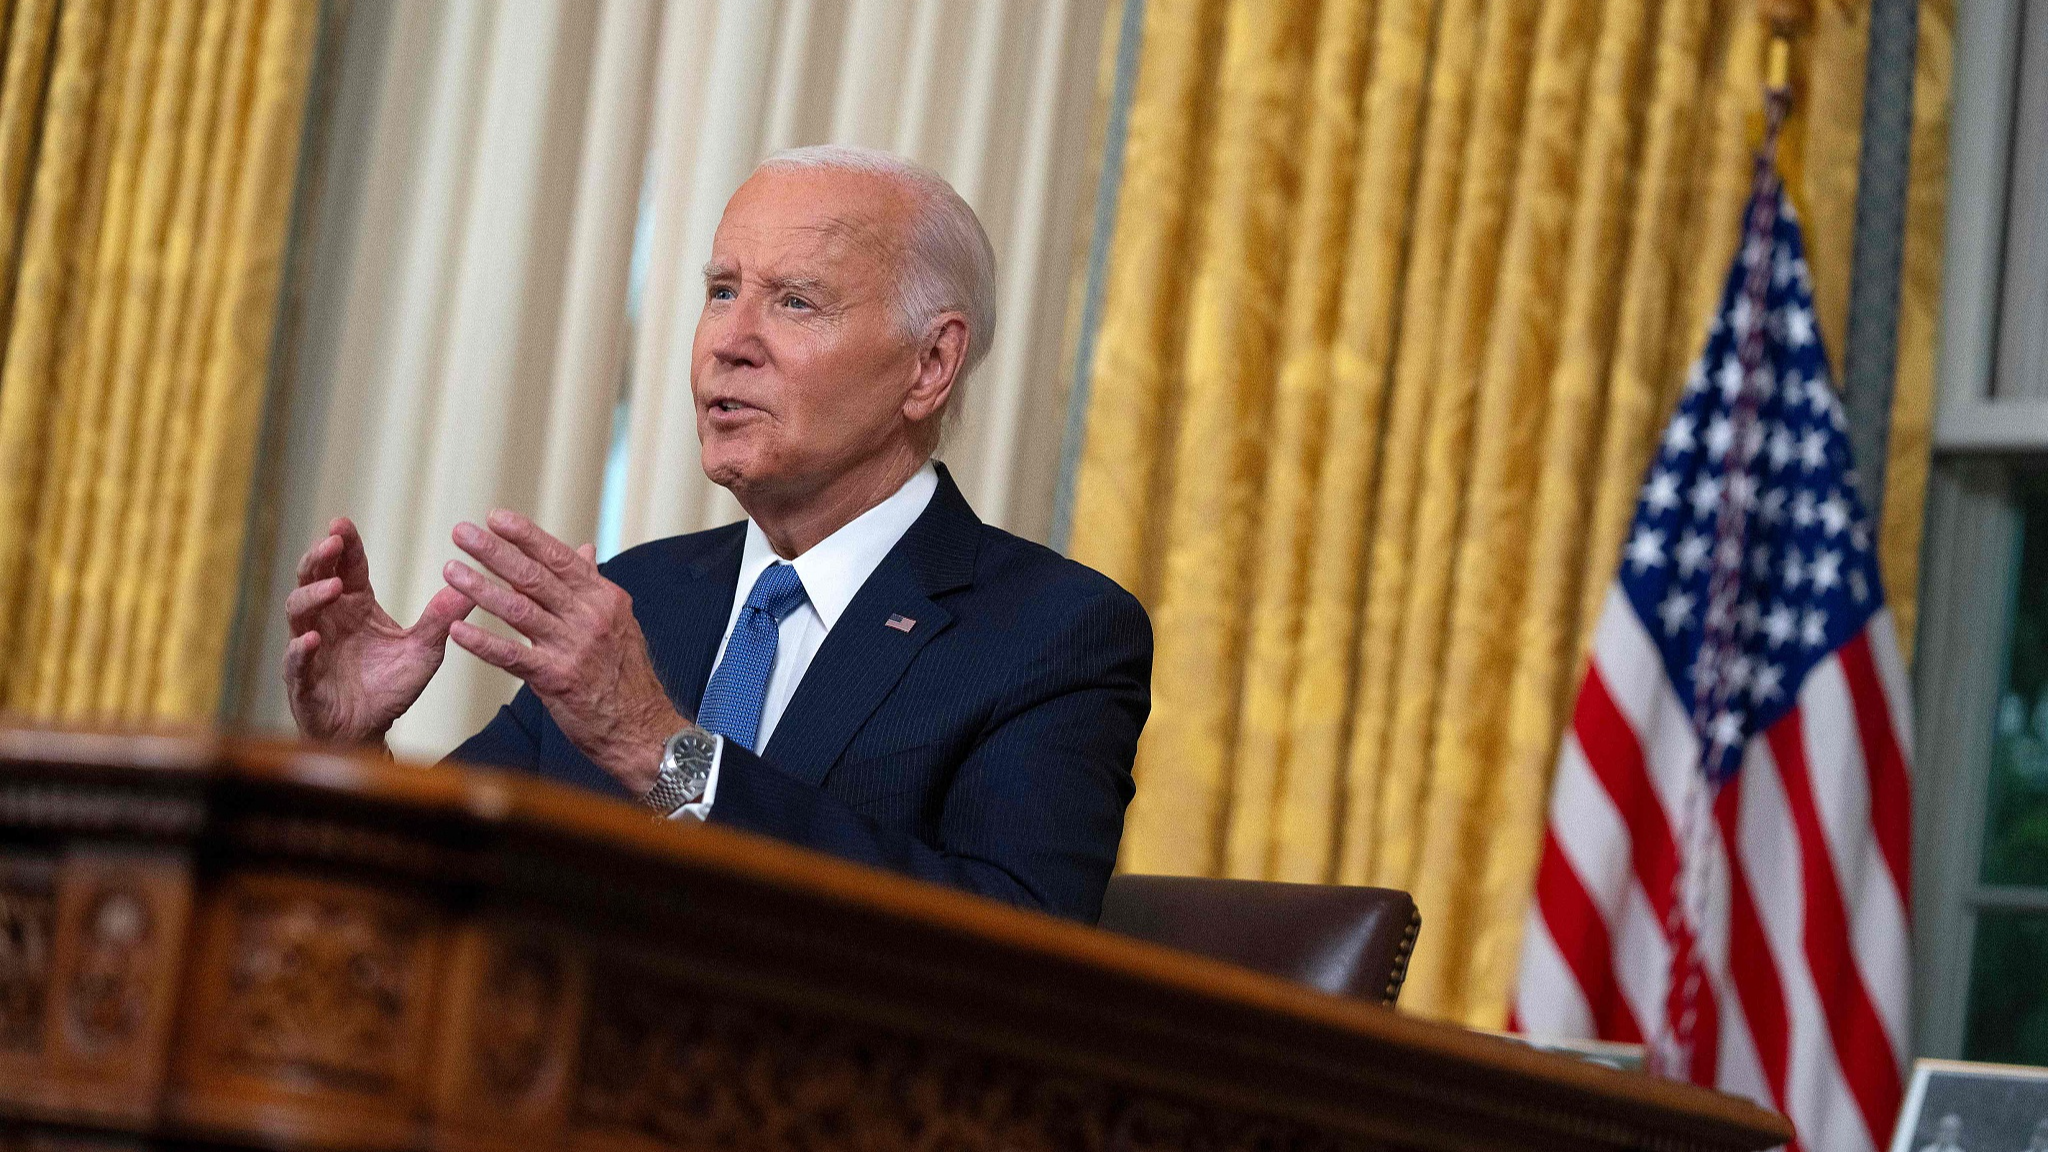 U.S. President Joe Biden addresses the nation about his decision to not seek reelection, in the Oval Office at the White House in Washington, D.C., July 24, 2024. /CFP